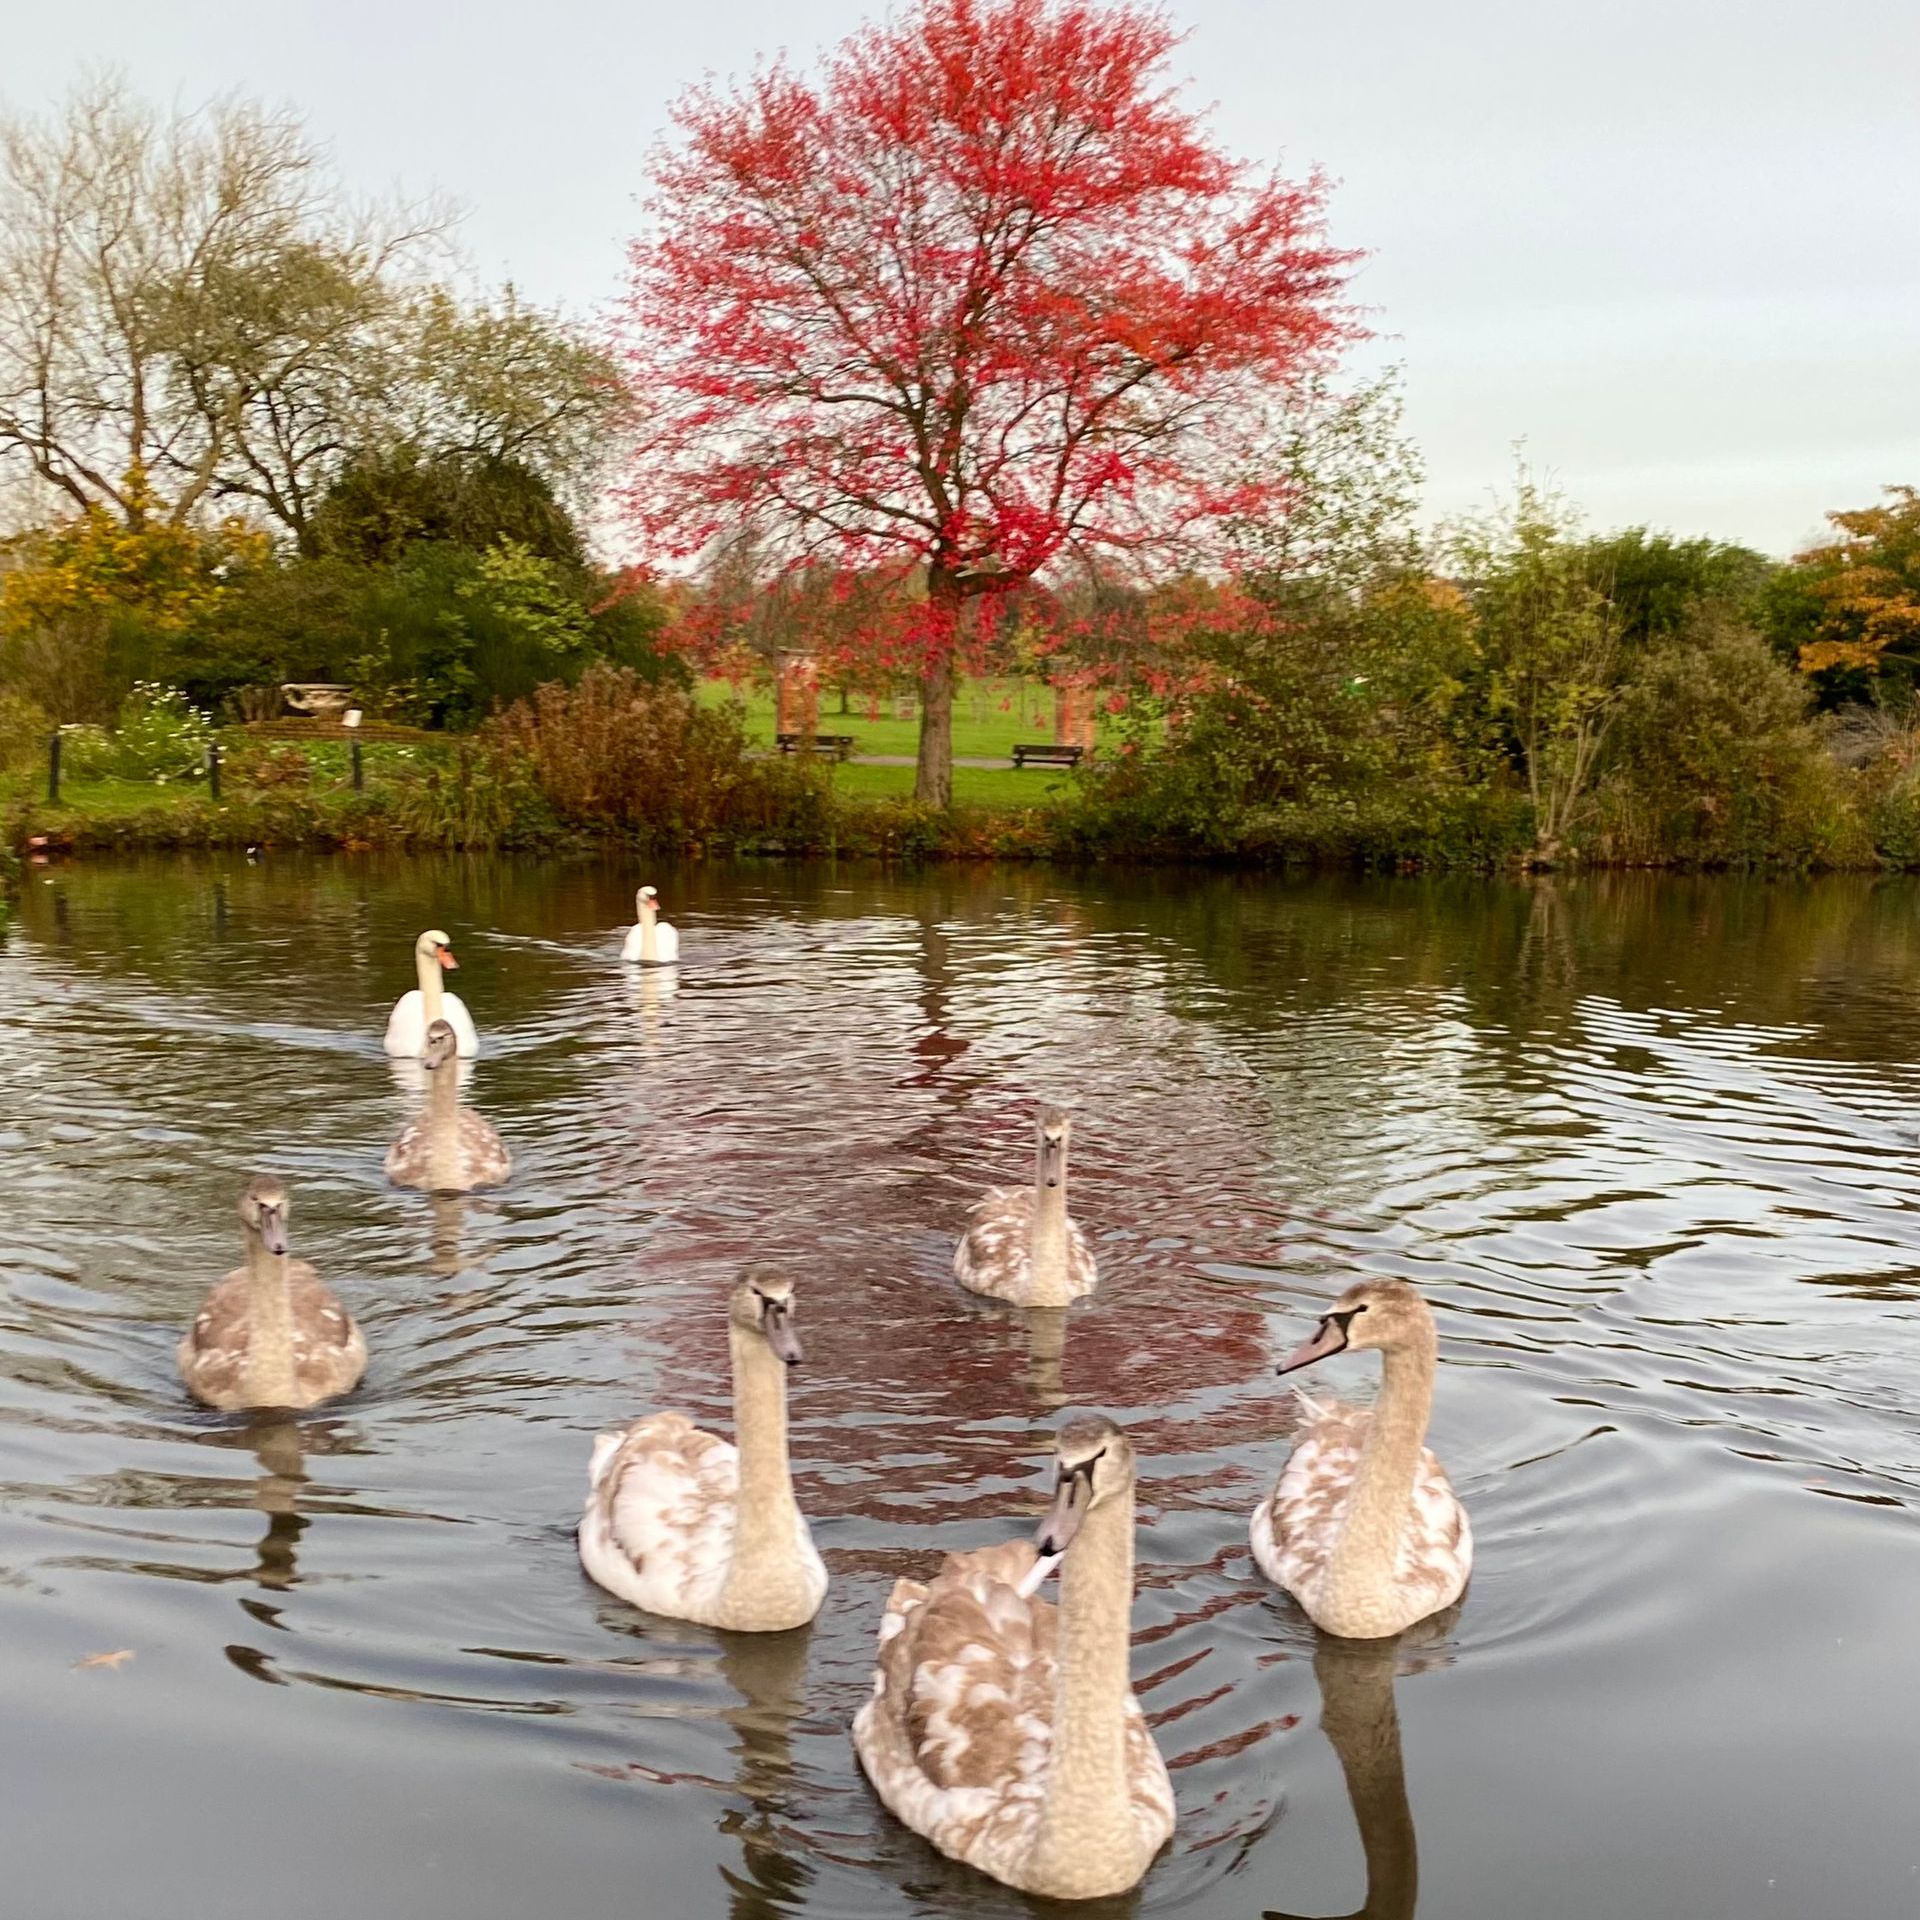 A group of swans are swimming in a lake with a red tree in the background